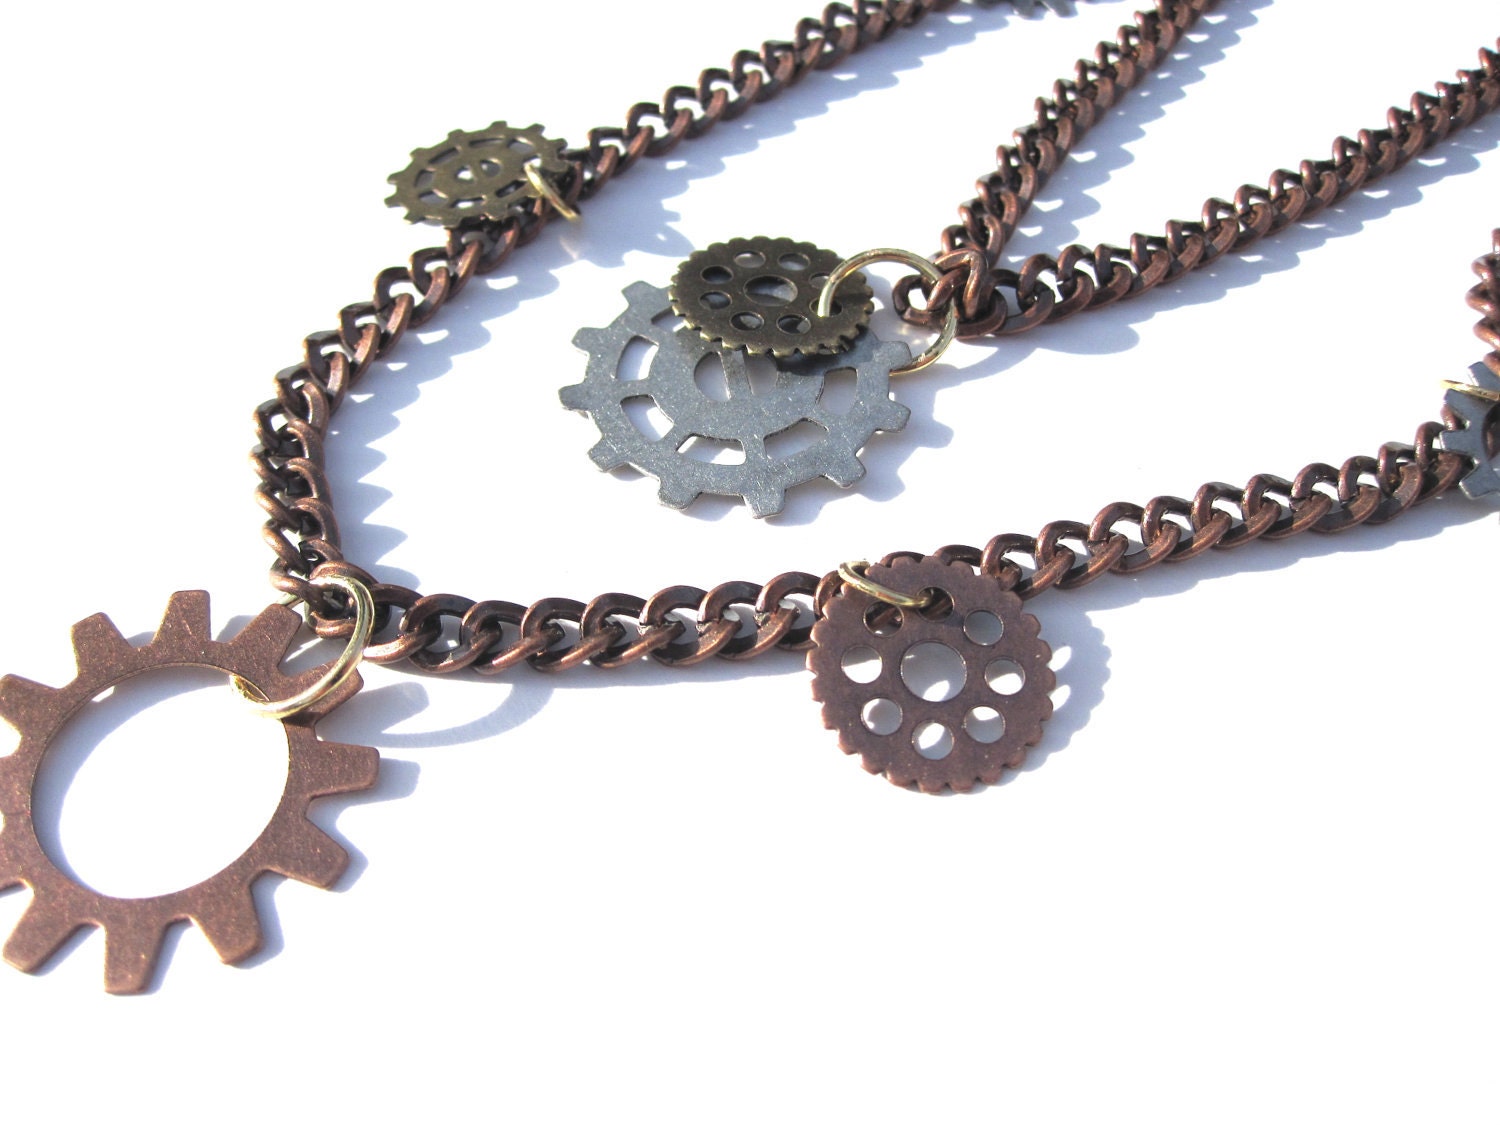 Industrial Gears Mixed Metal Necklace - Gold Copper Silver - Women's Gifts